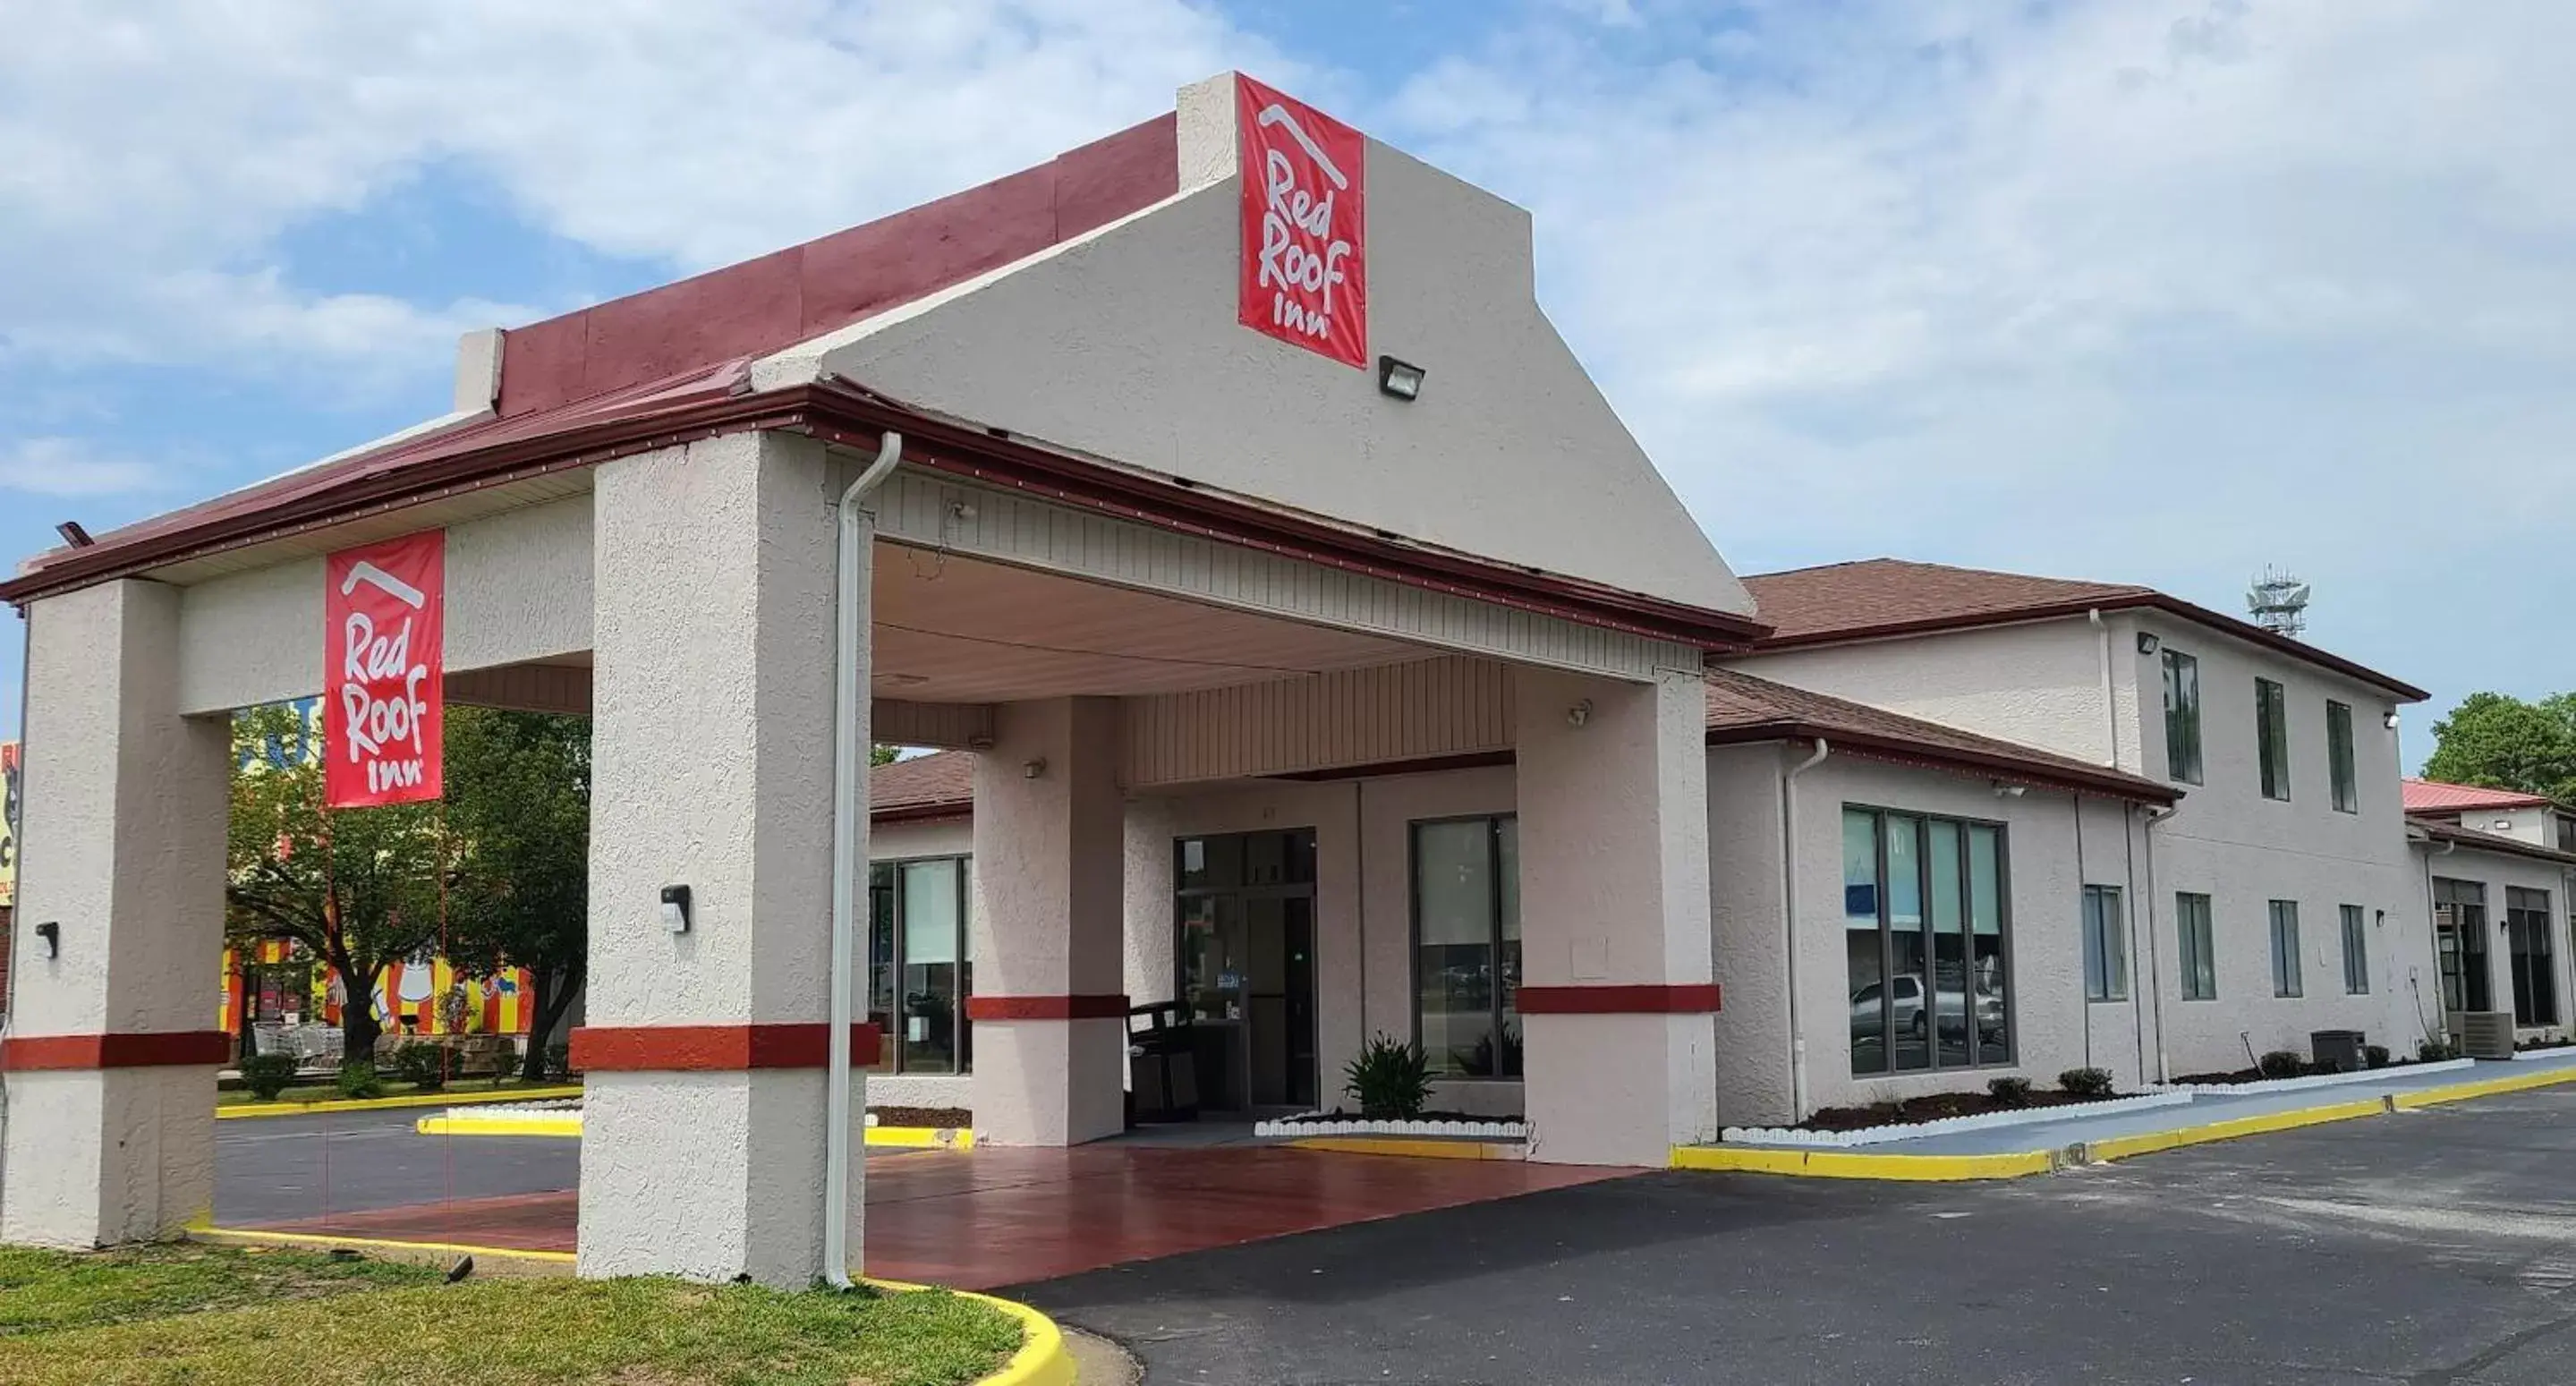 Property Building in Red Roof Inn Florence, SC